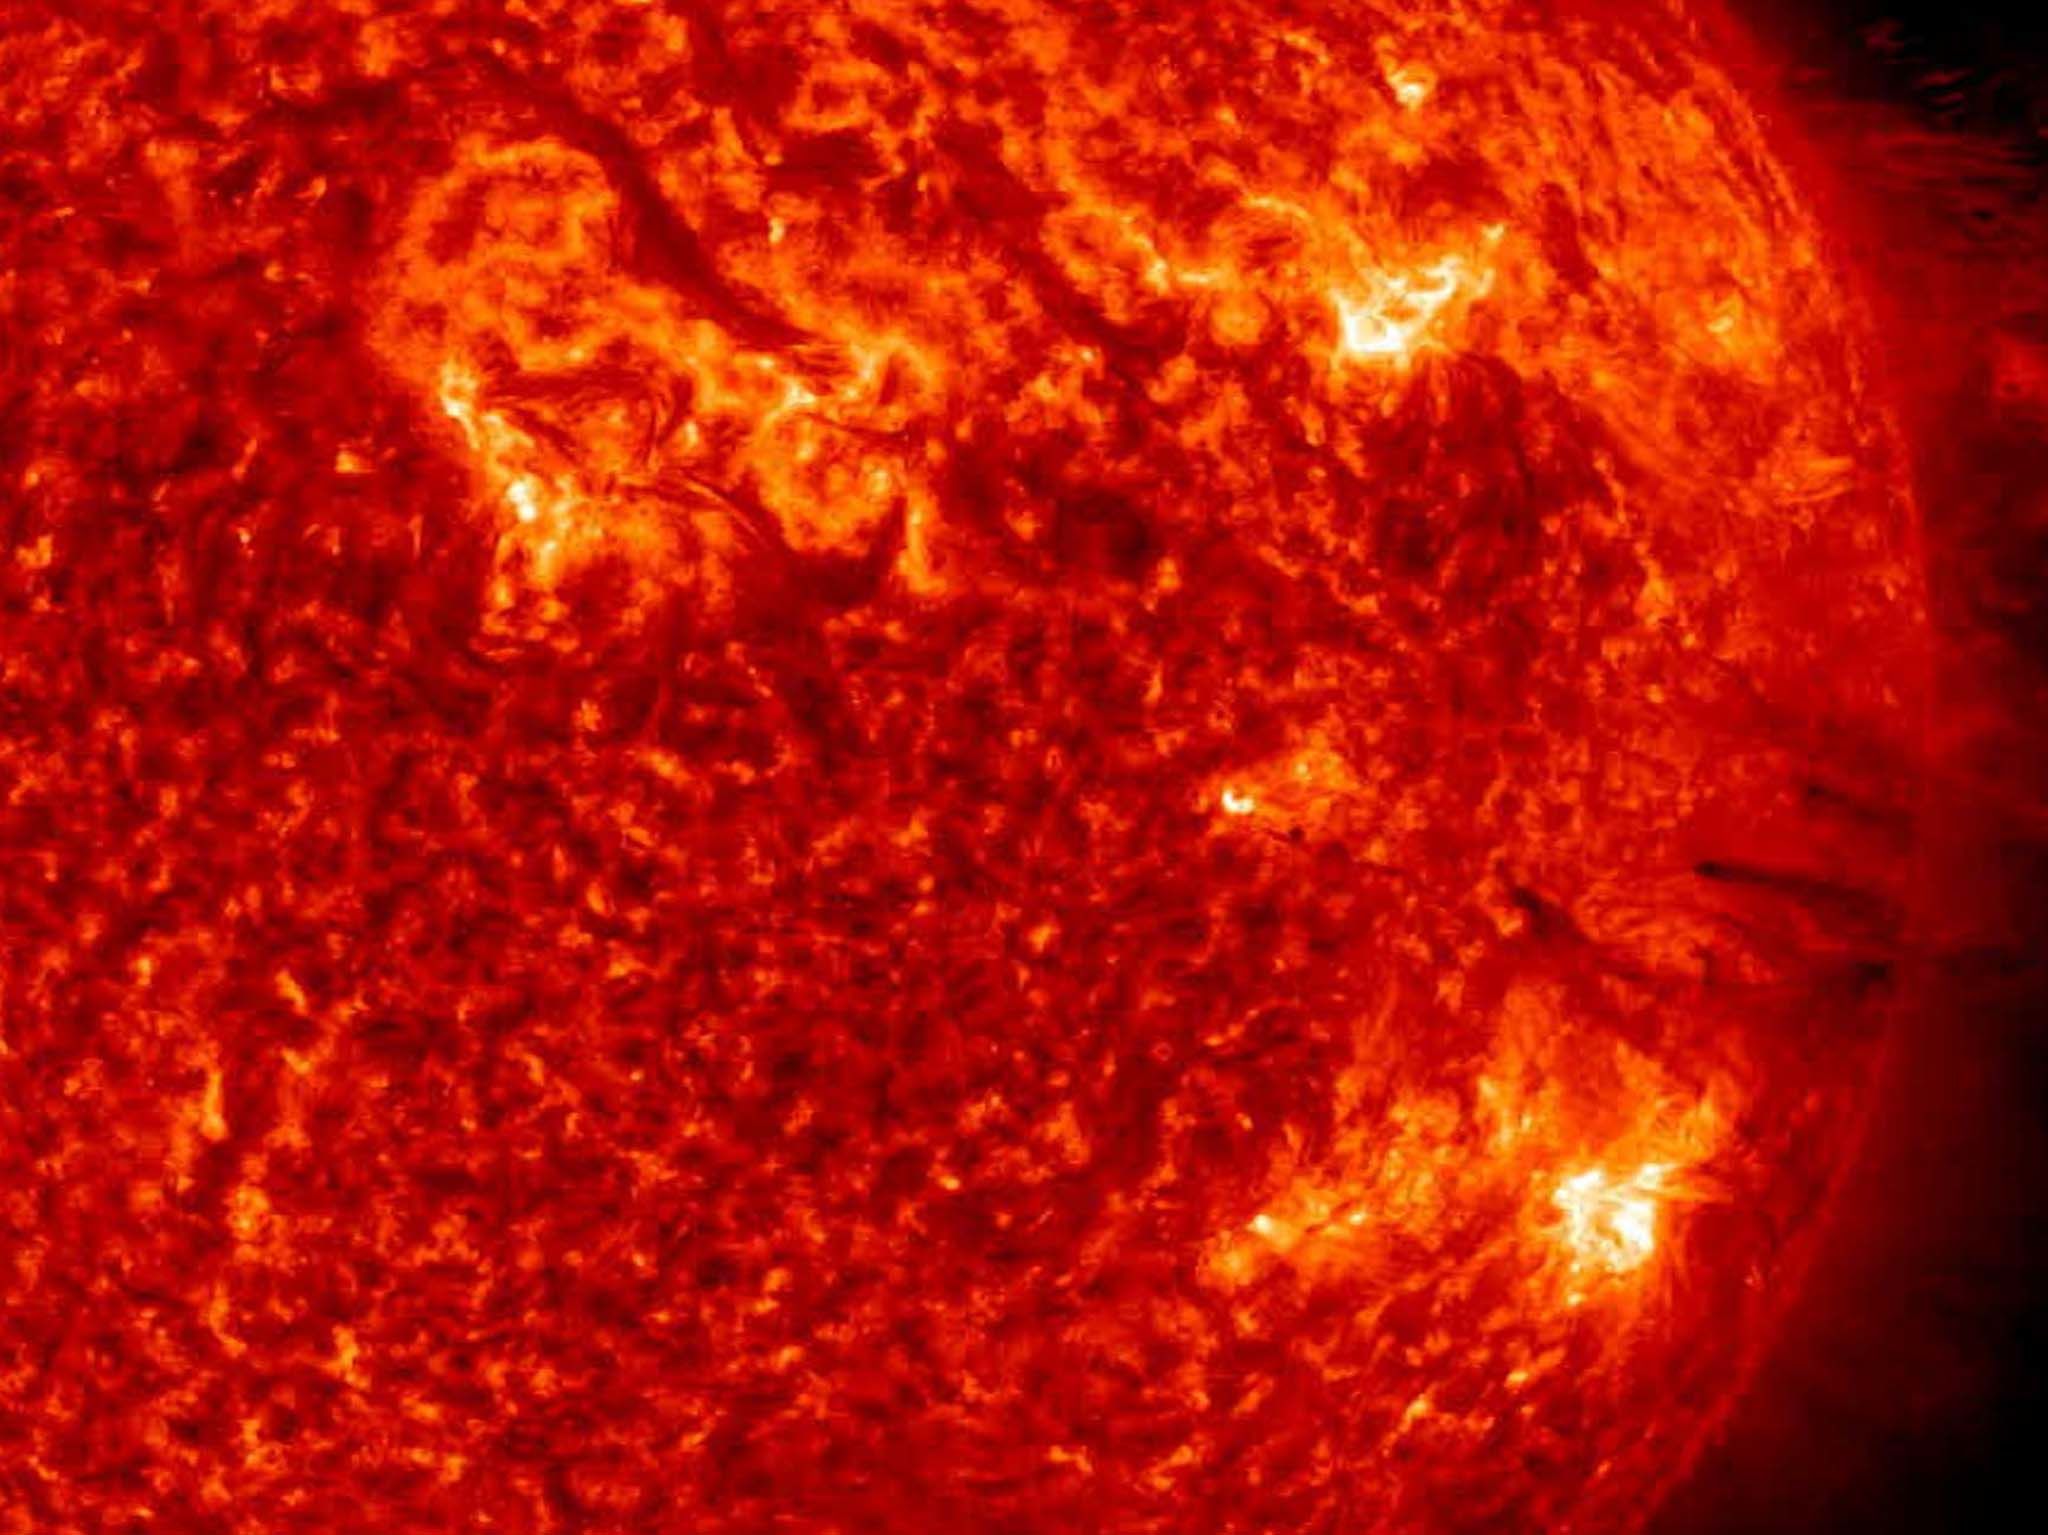 Whole image of the sun, showing ejections, tinted red. [Photo of the day - May 2020]